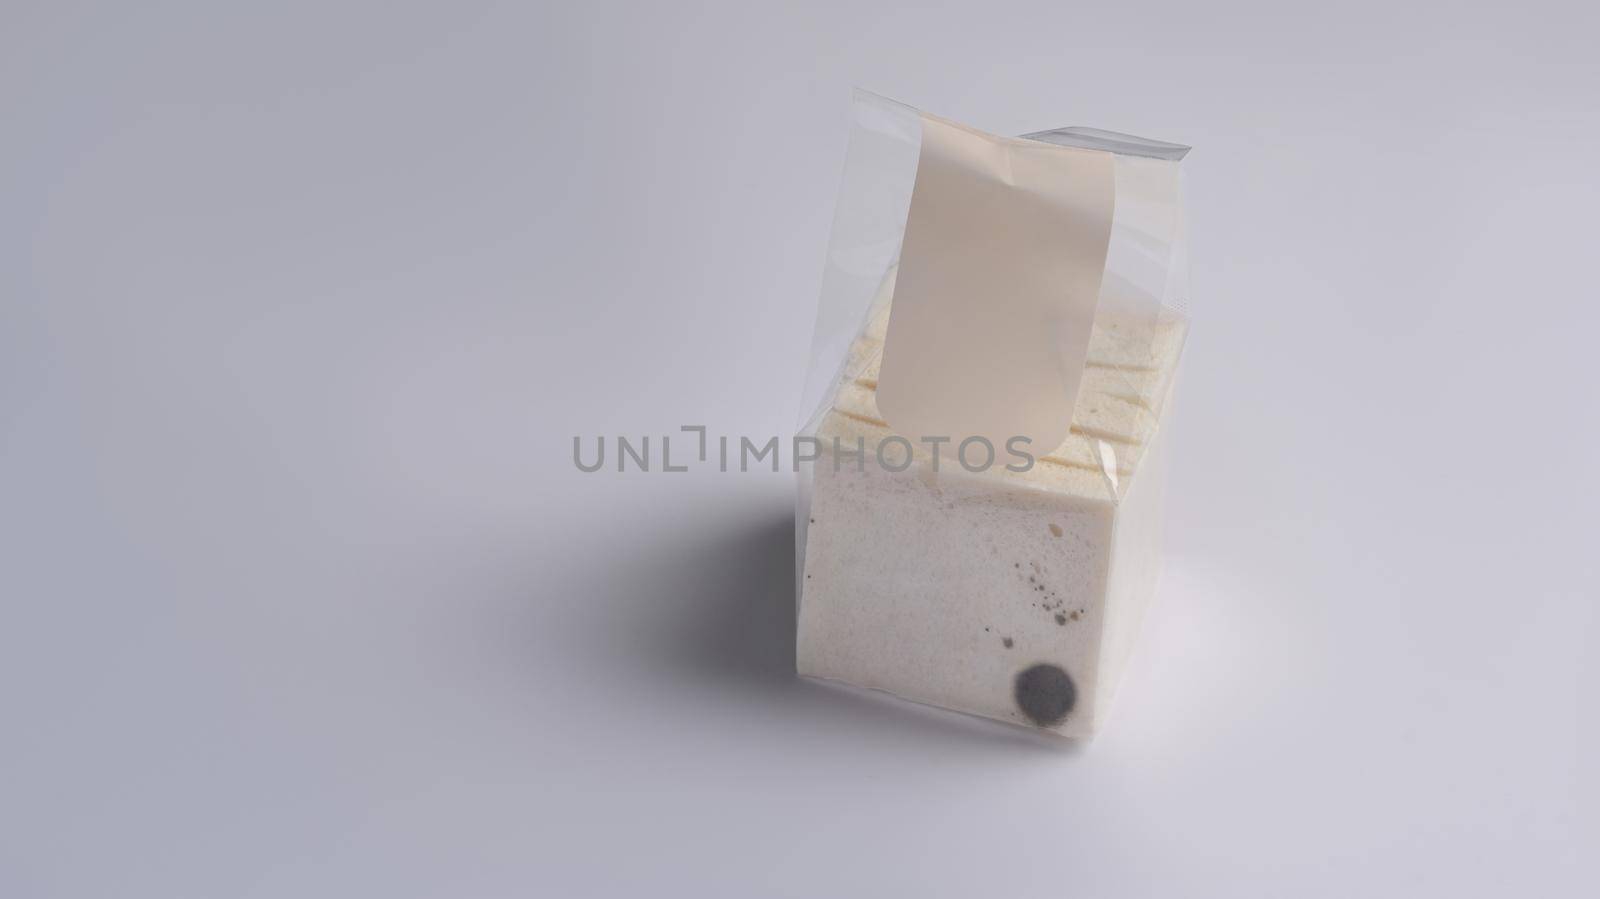 Moldy bread in package on white background.